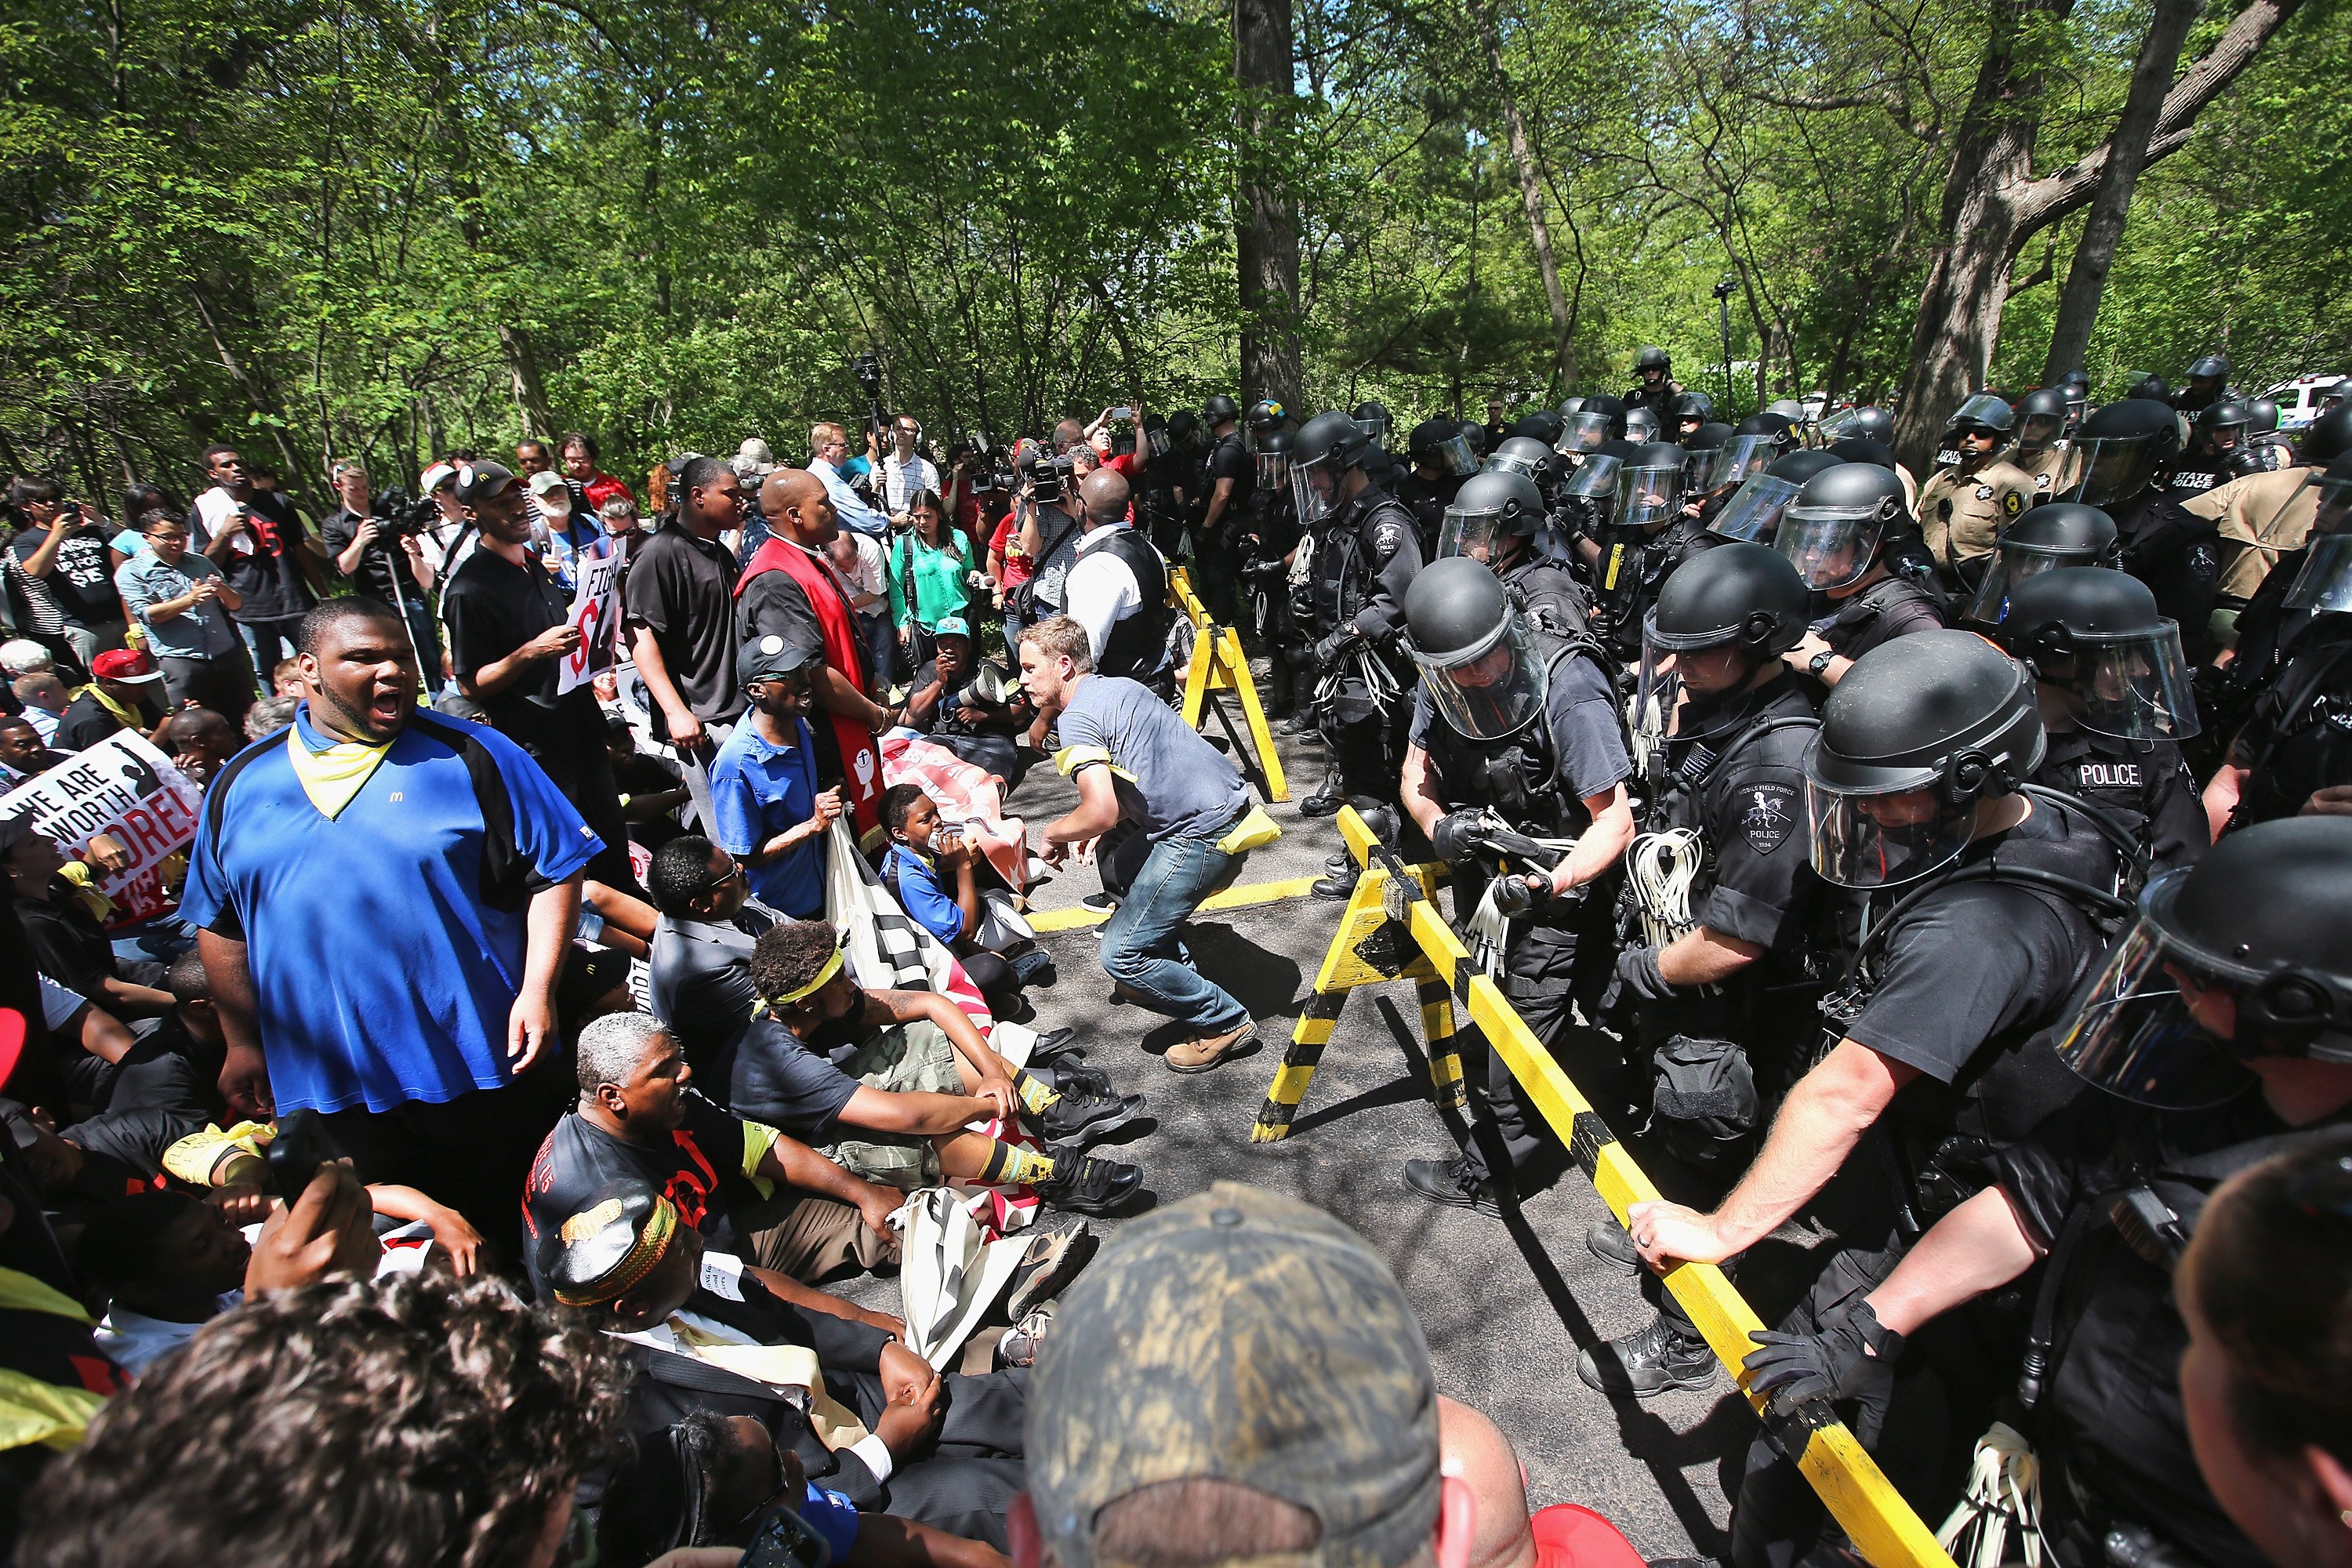 Police hold back fast food workers and activists demonstrating at the McDonald's corporate campus on May 21, 2014 in Oak Brook, Ill. (Scott Olson—Getty Images)